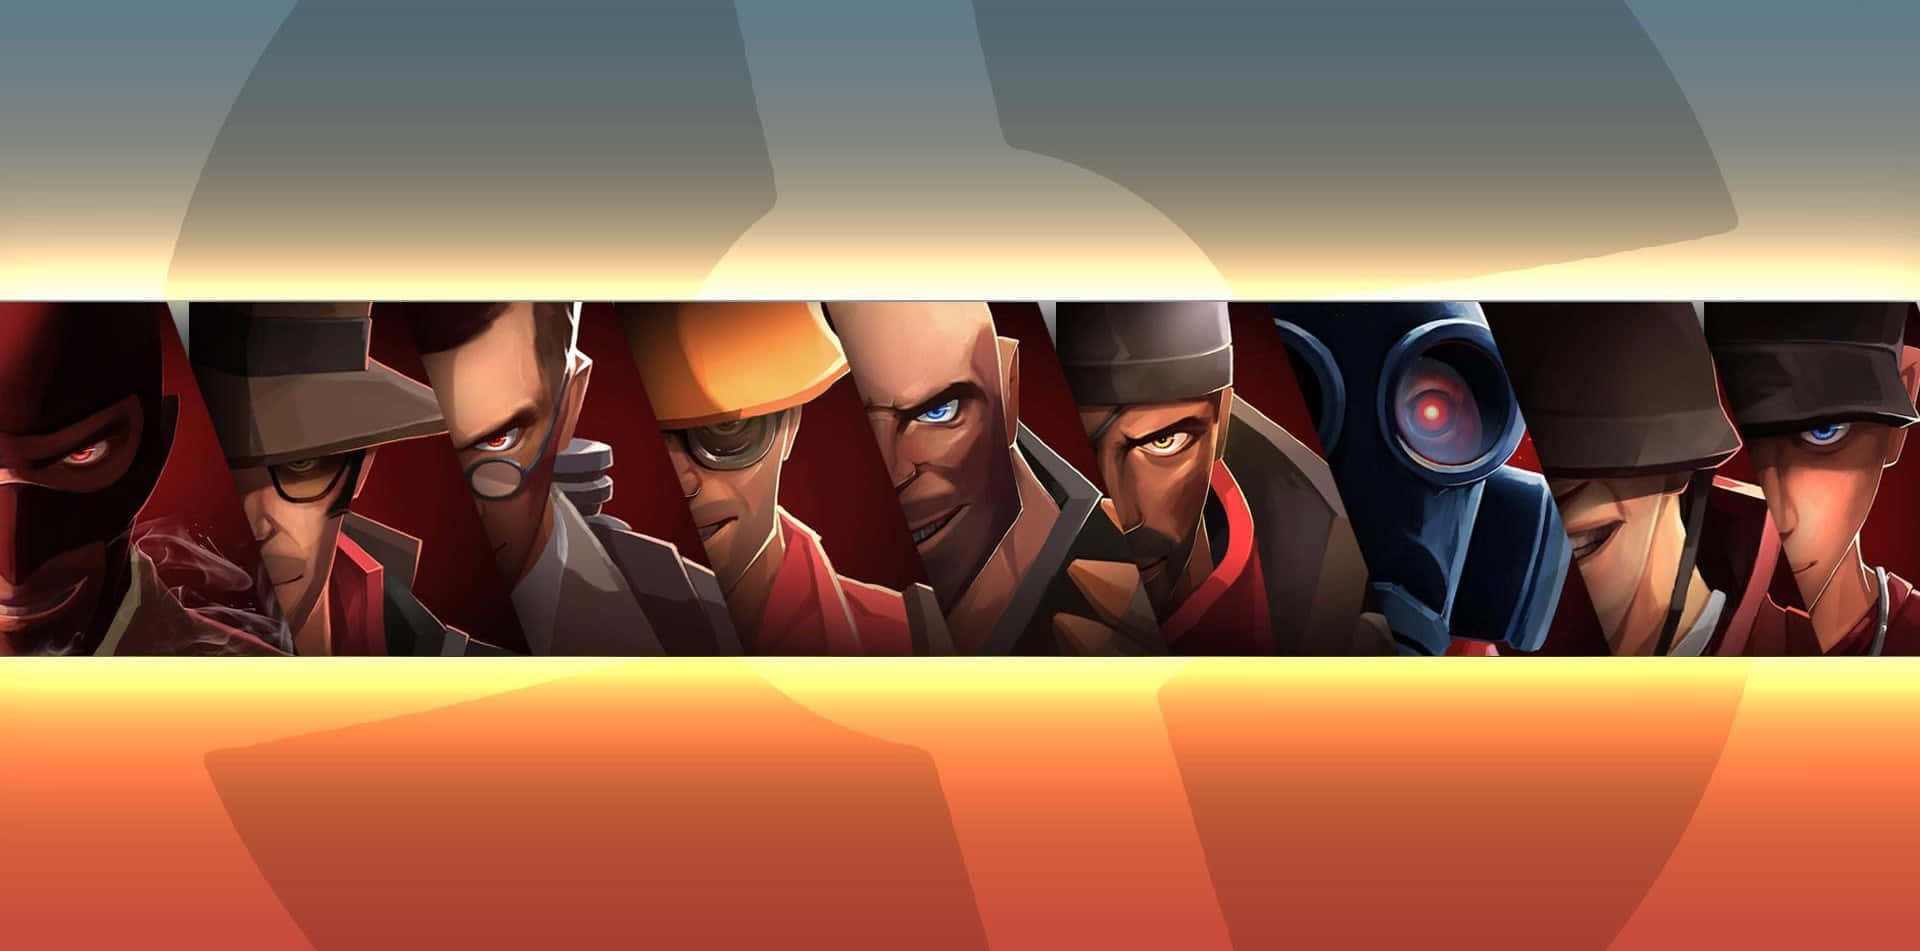 Exciting Team Fortress 2 Character Lineup Wallpaper